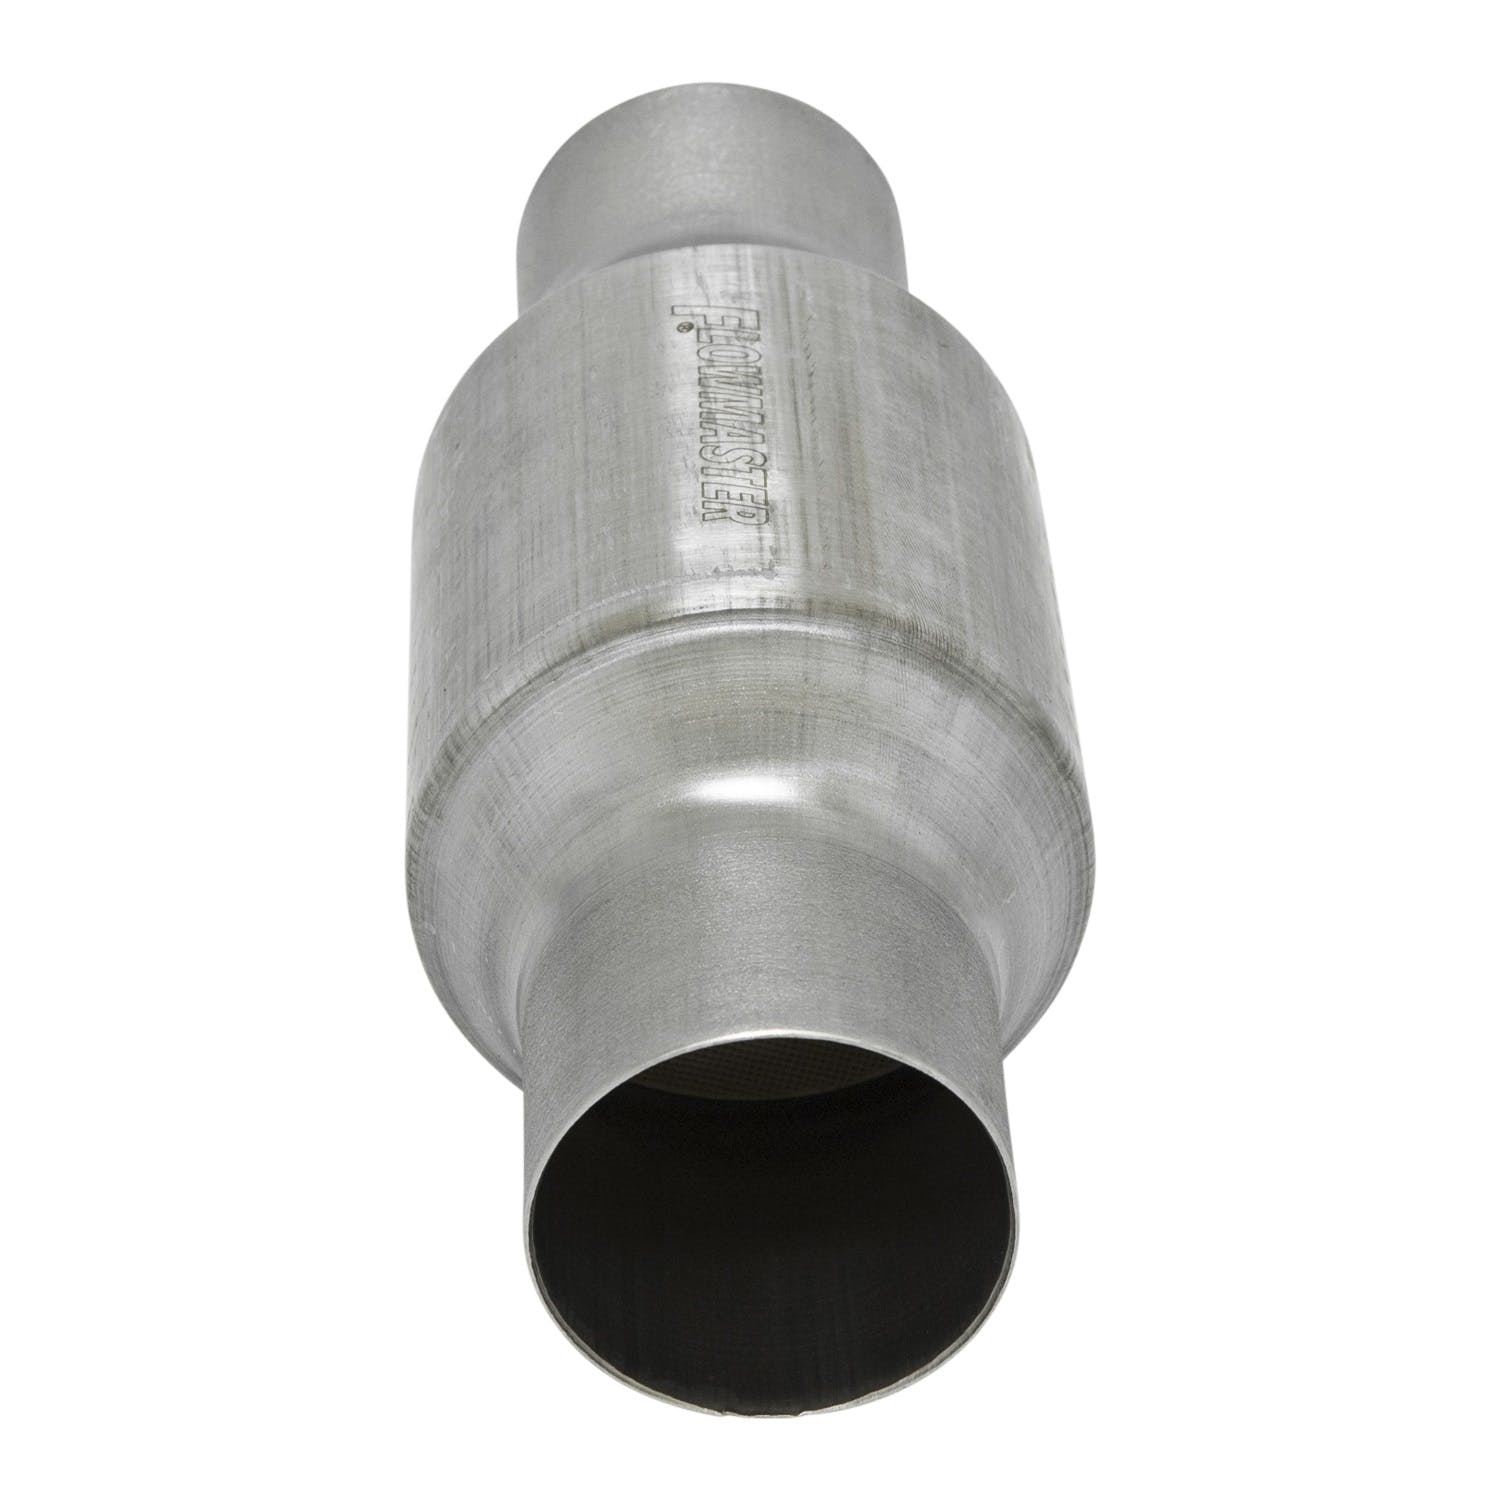 Flowmaster Catalytic Converters 2230125 Catalytic Converter-Universal-223 Series-2.50 in. Inlet/Outlet-49 State